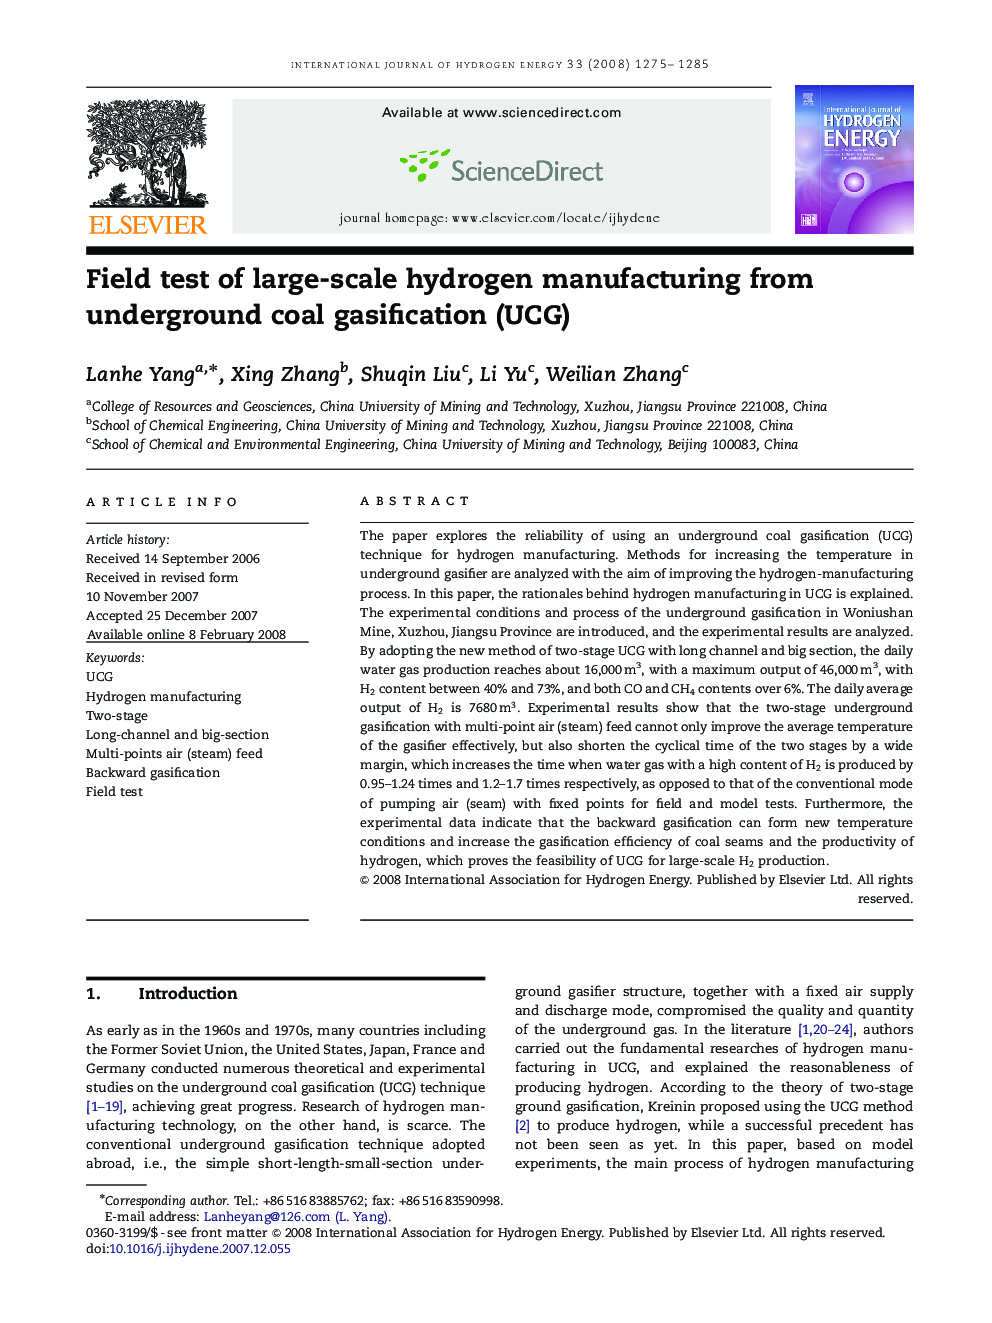 Field test of large-scale hydrogen manufacturing from underground coal gasification (UCG)